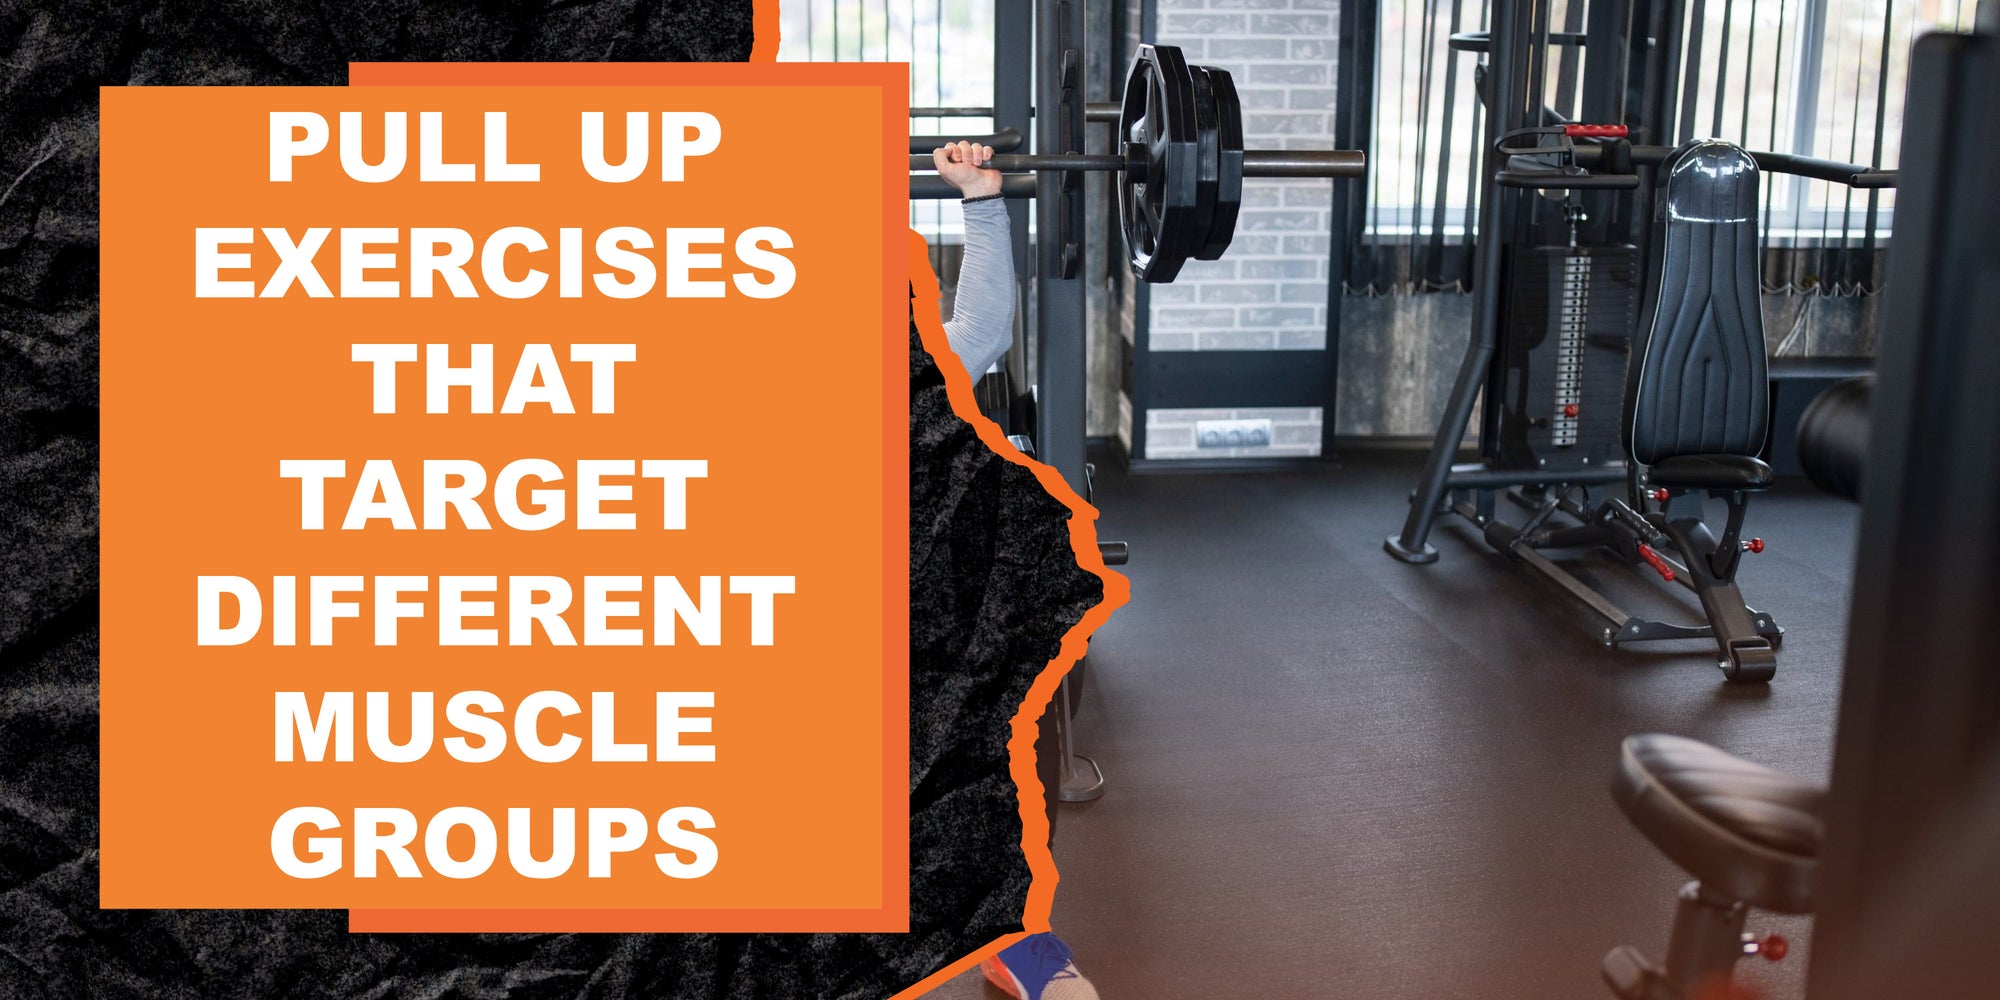 Pull Up Exercises That Target Different Muscle Groups